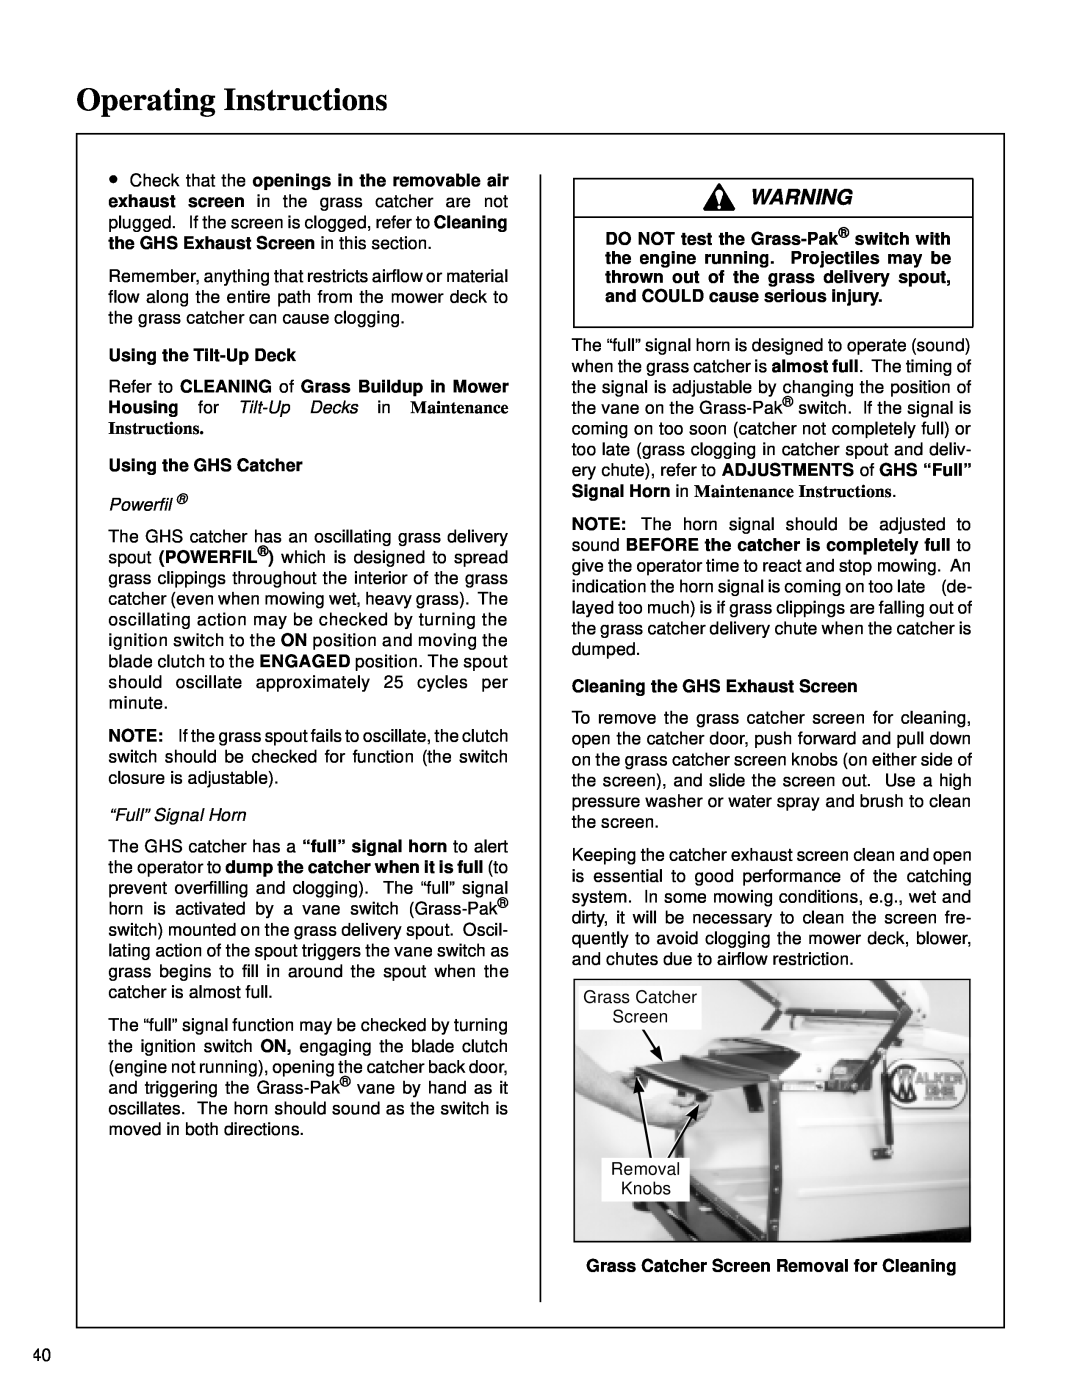 Walker MT owner manual Operating Instructions, Using the Tilt-Up Deck, Using the GHS Catcher, Powerfil, “Full” Signal Horn 